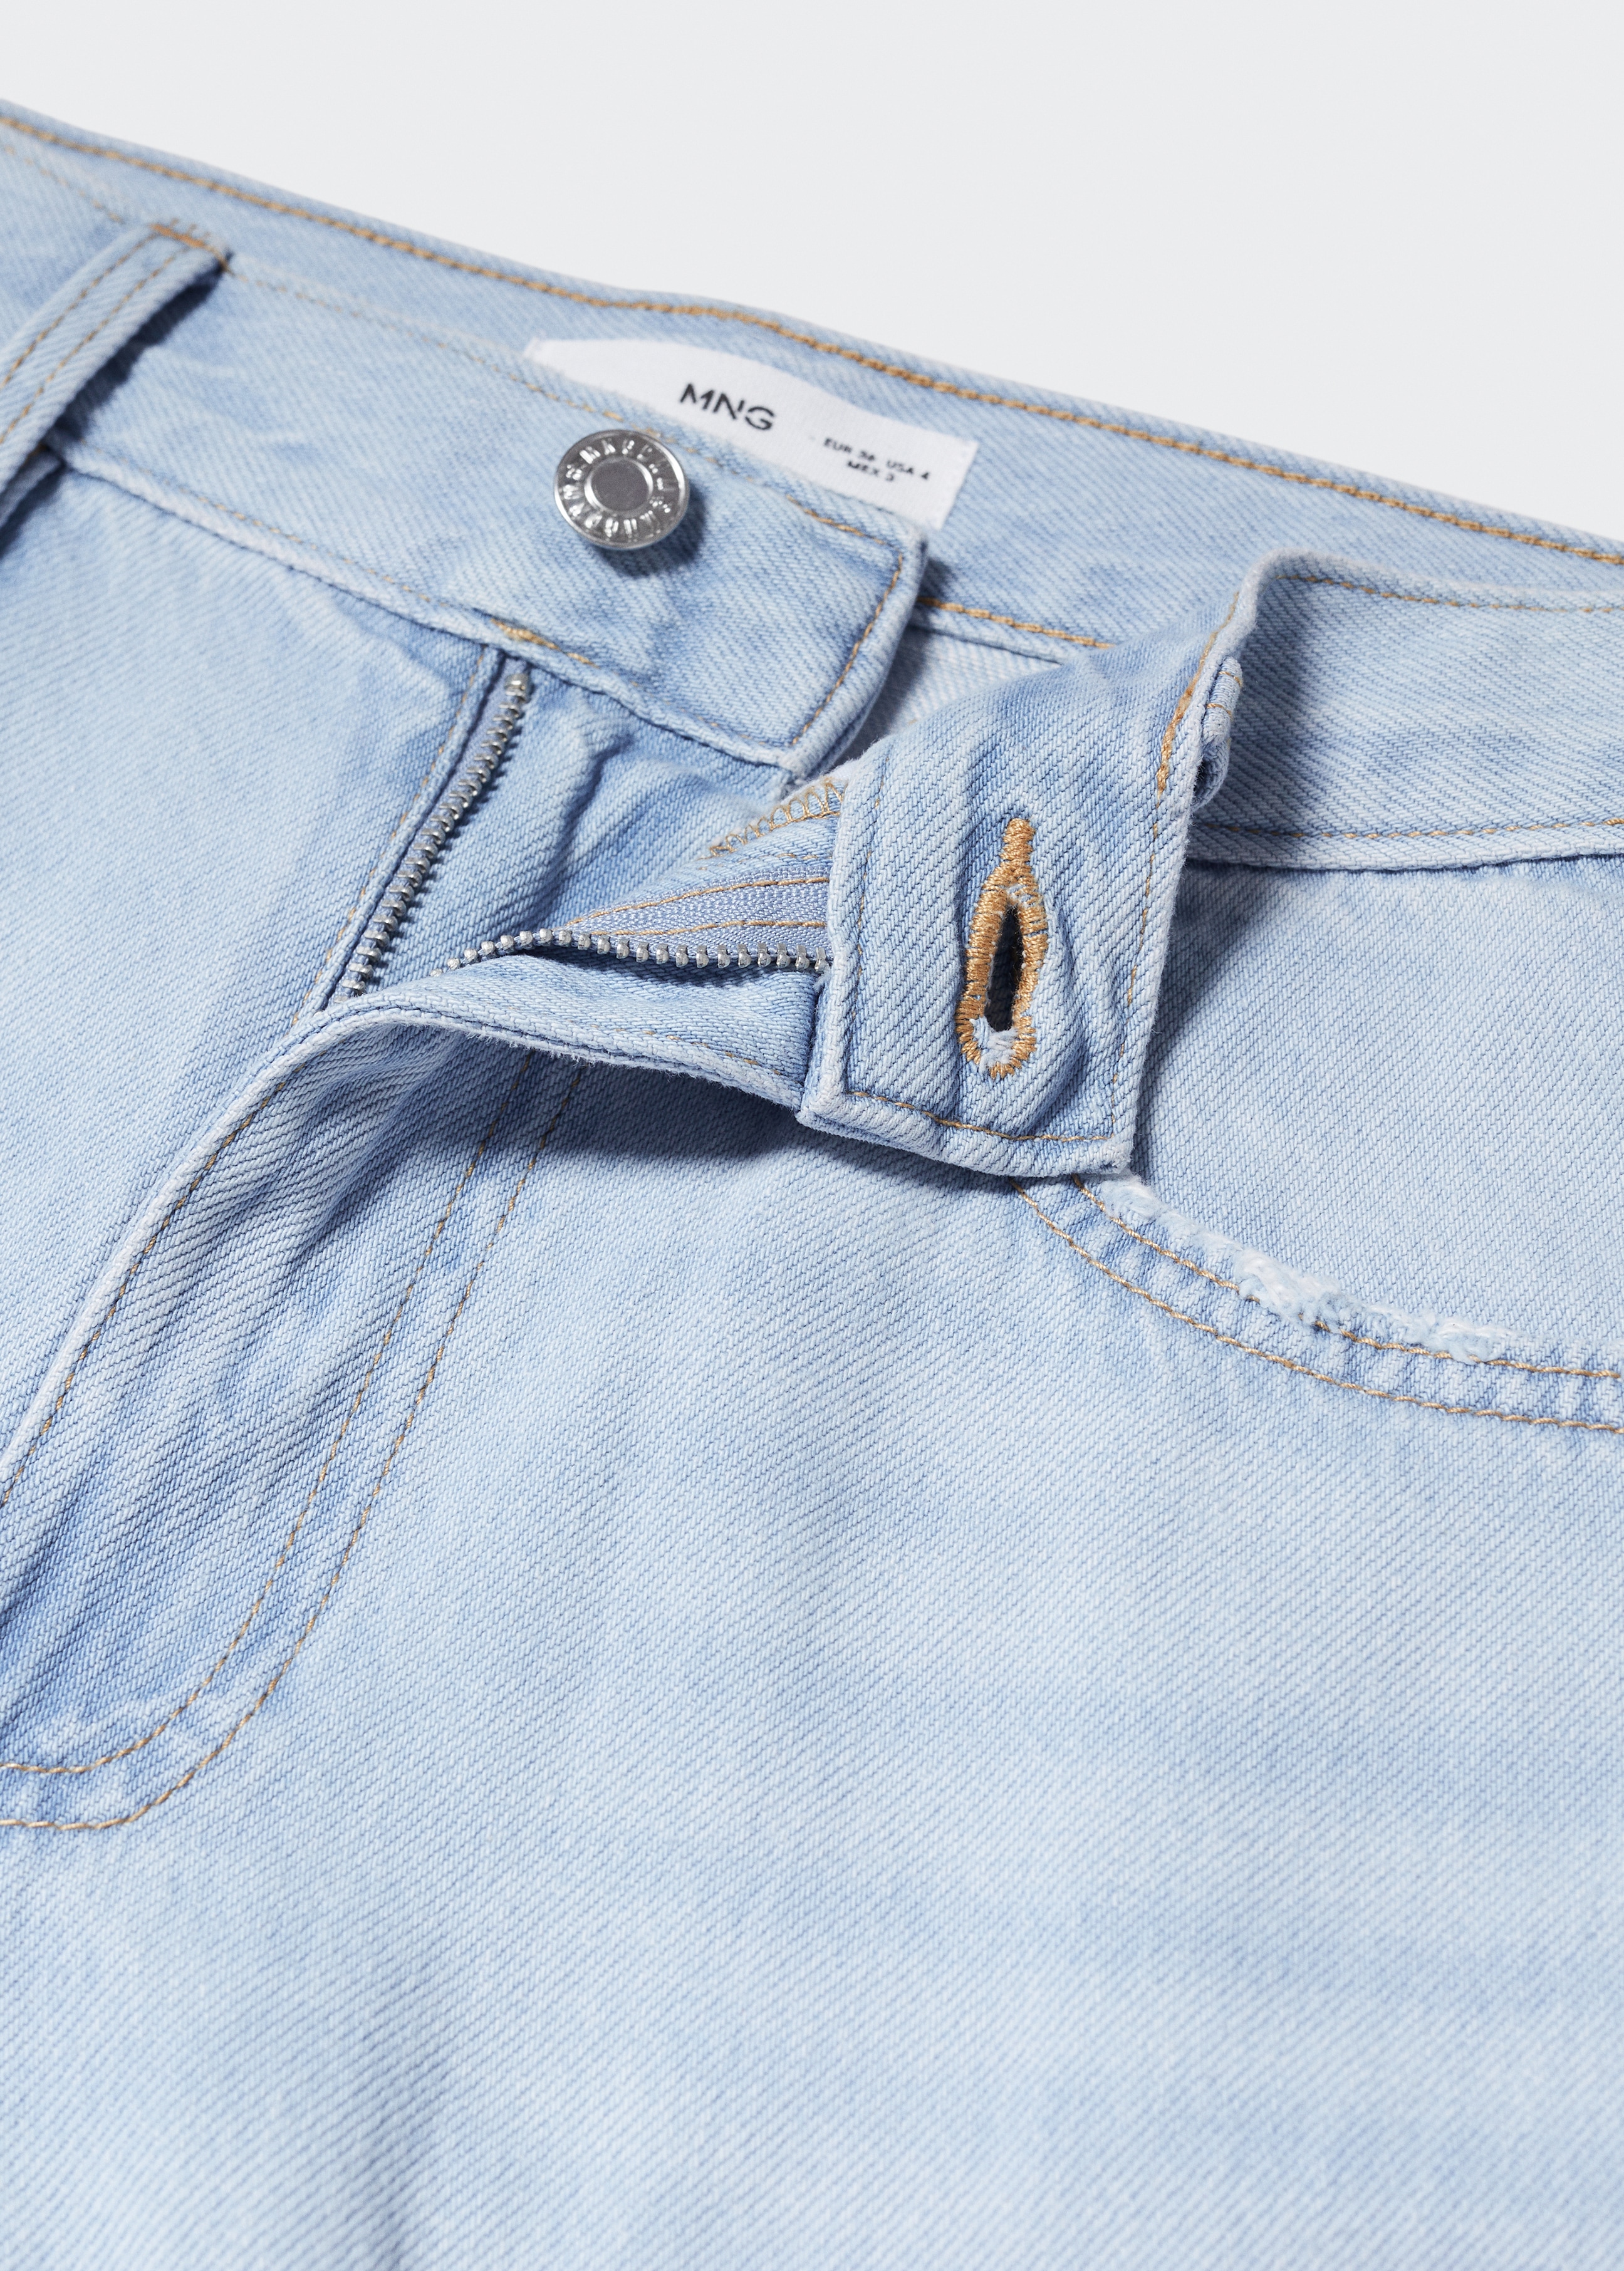 Ripped straight jeans - Details of the article 8